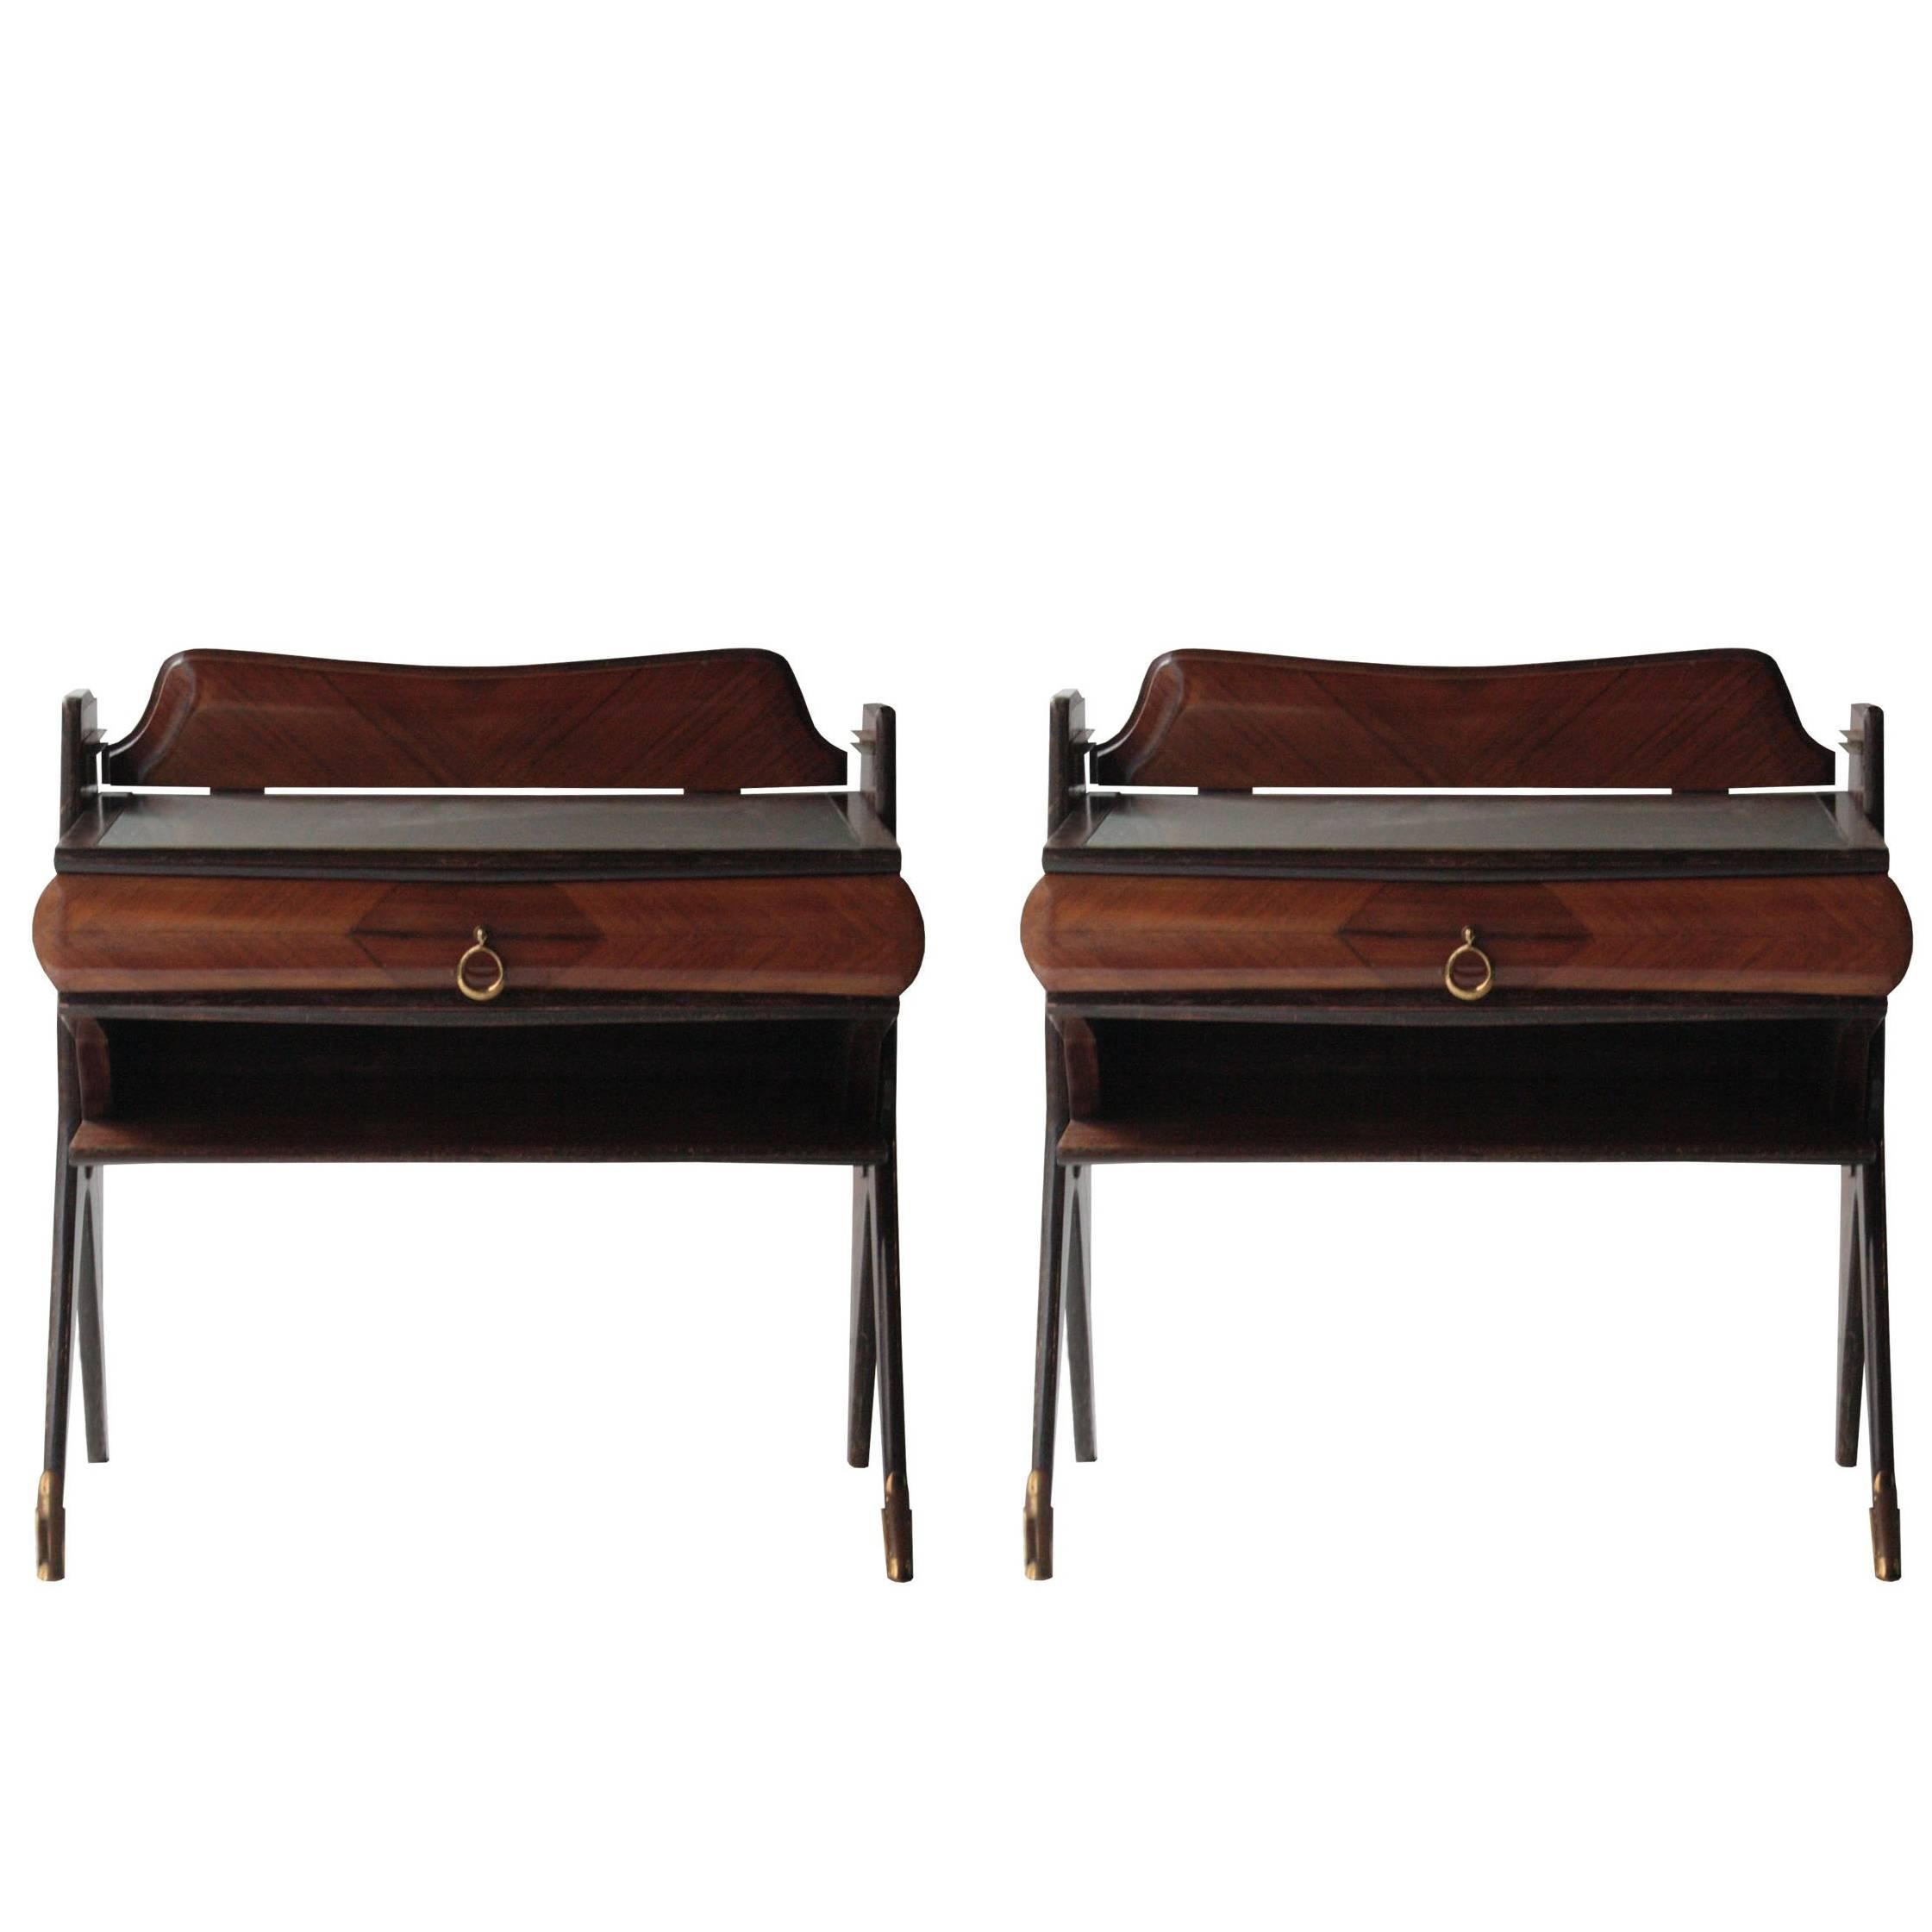 Pair of Bedside Tables in Rosewood Wood, Italy, 1950